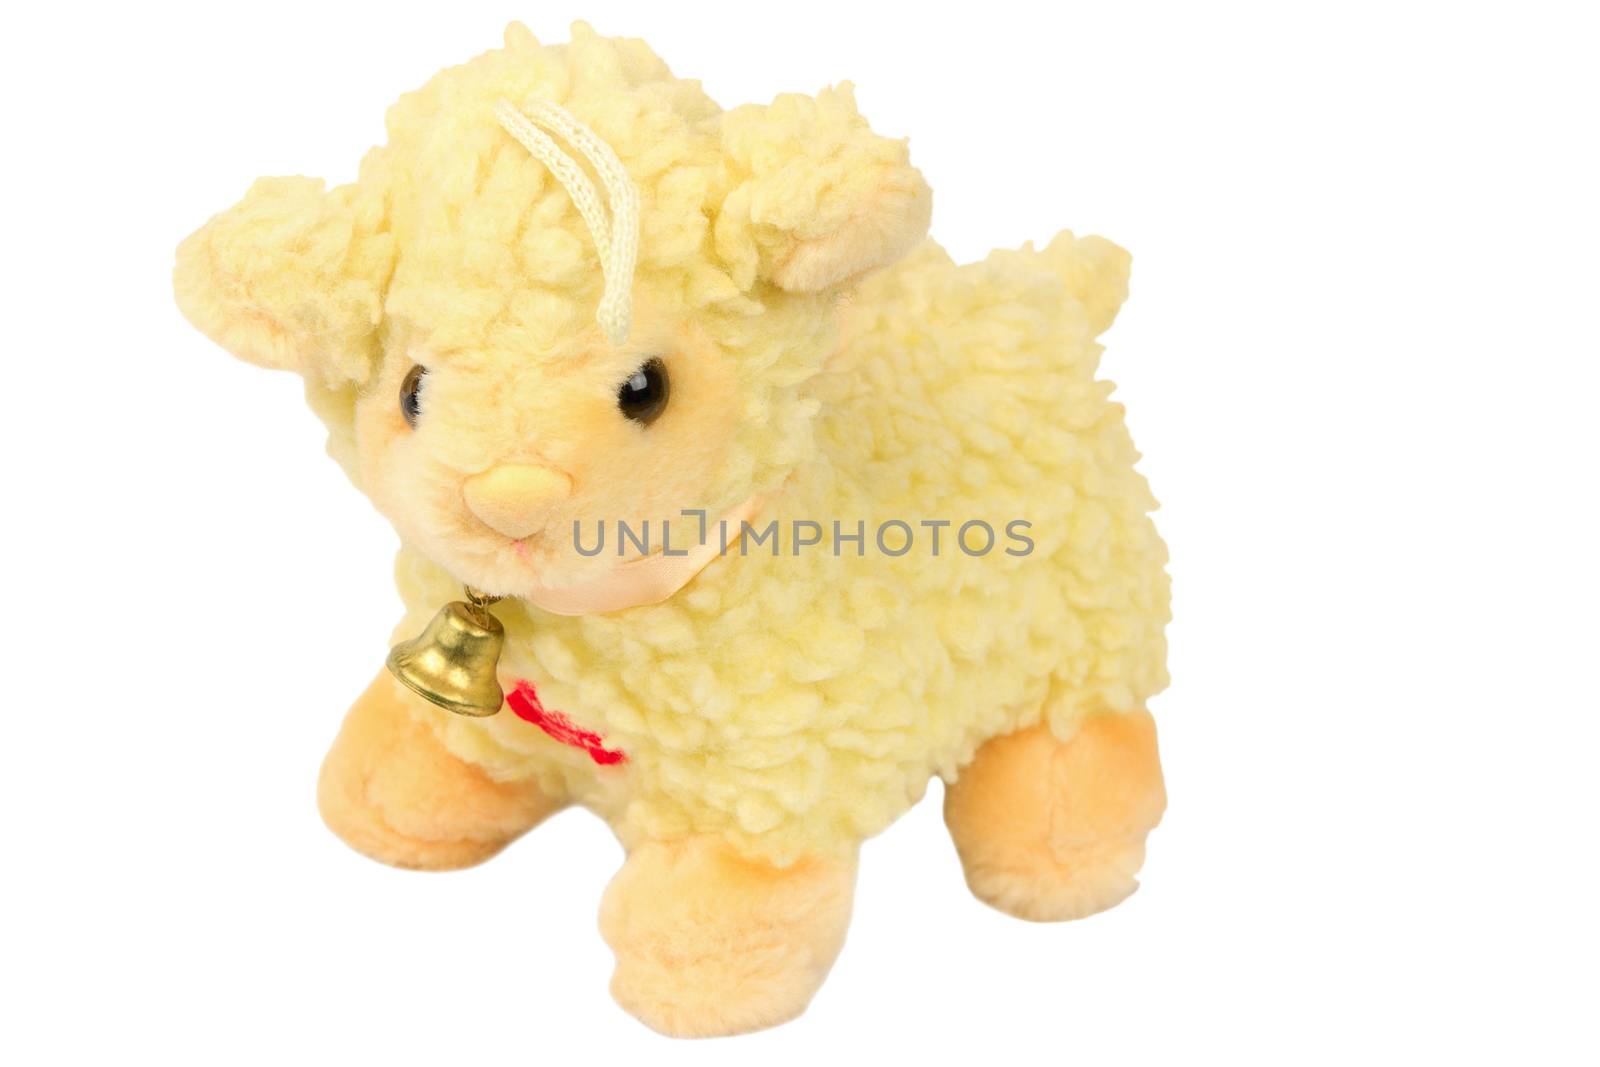 soft toy lamb with a bell